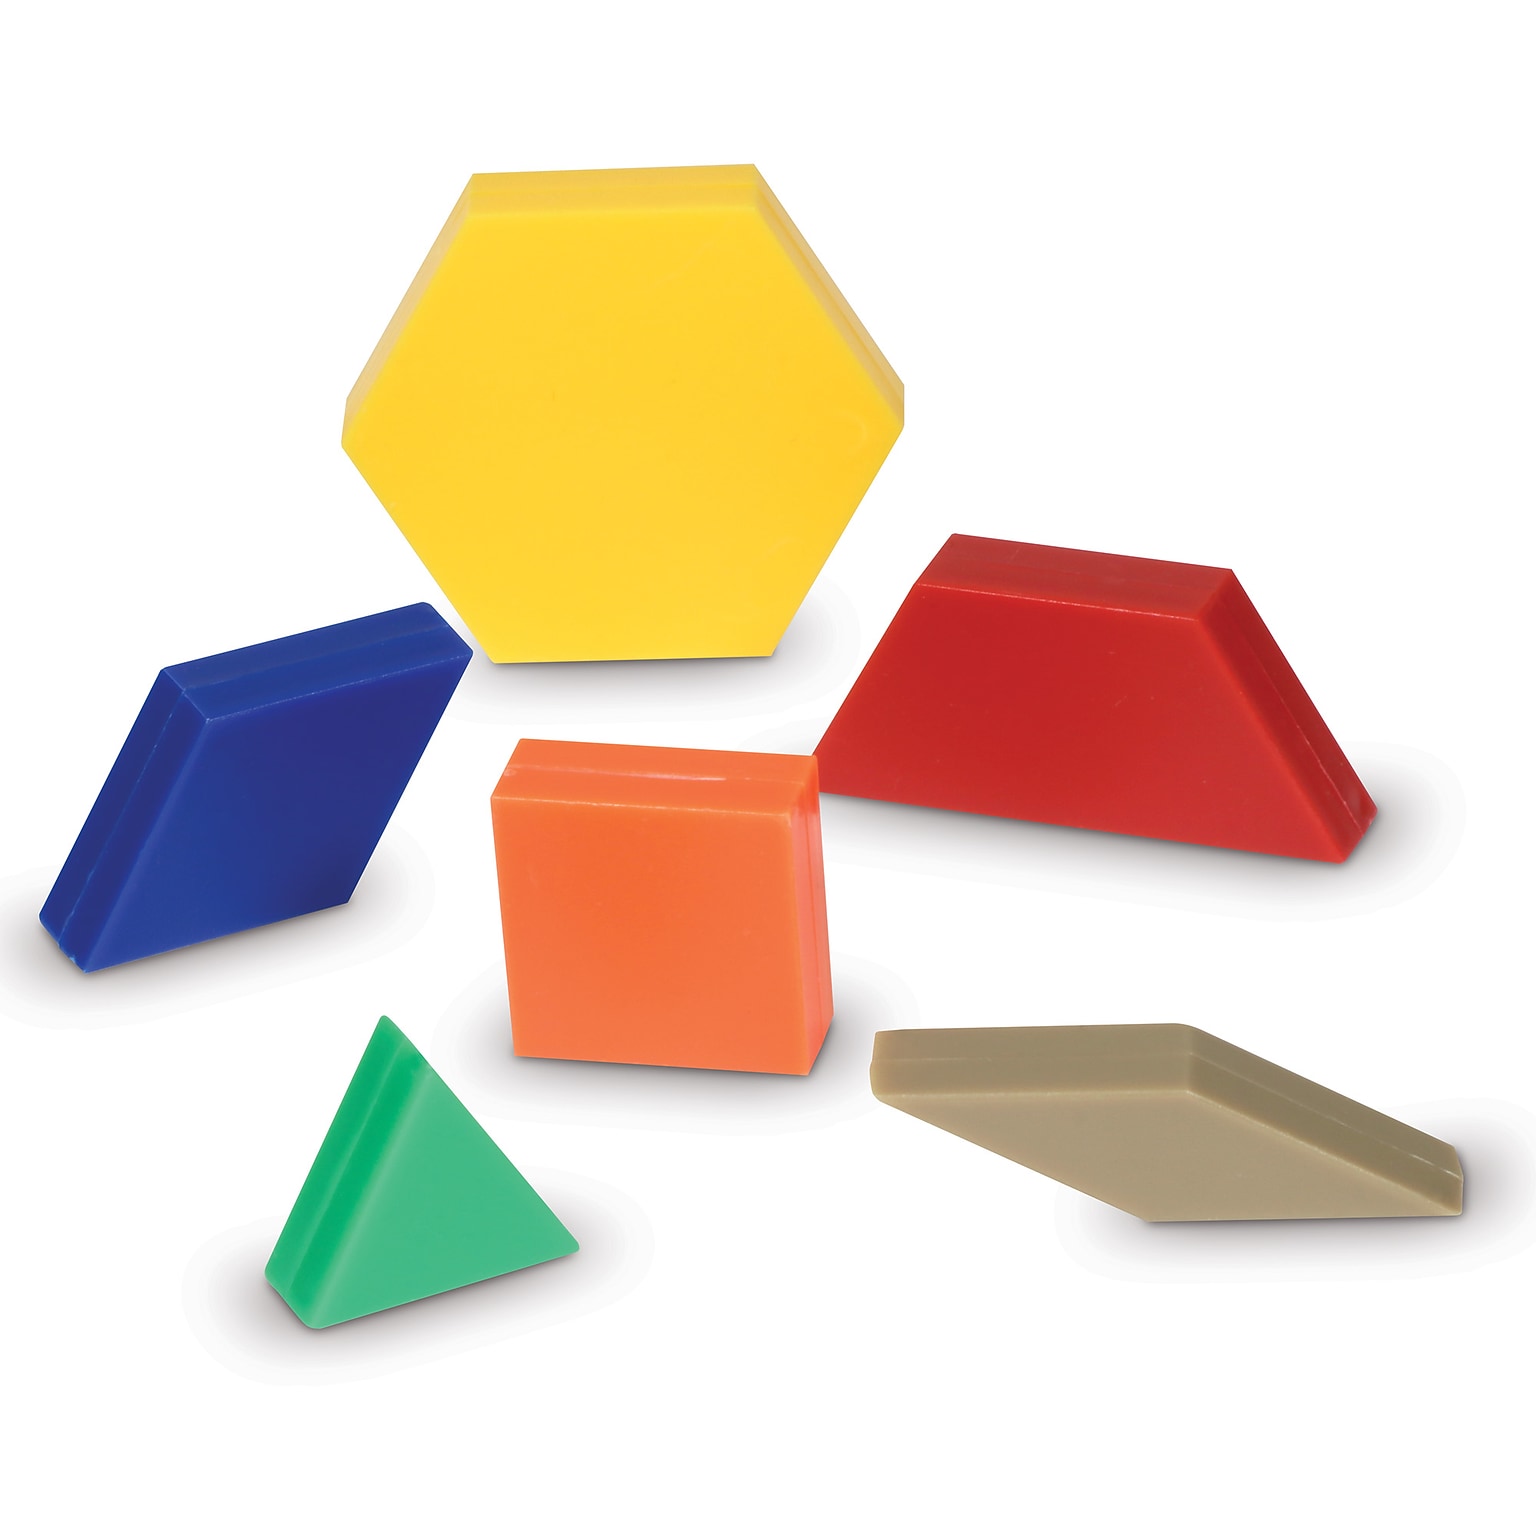 Learning Resources Pattern Blocks, Math Concepts, Set of 250 (LER0632)